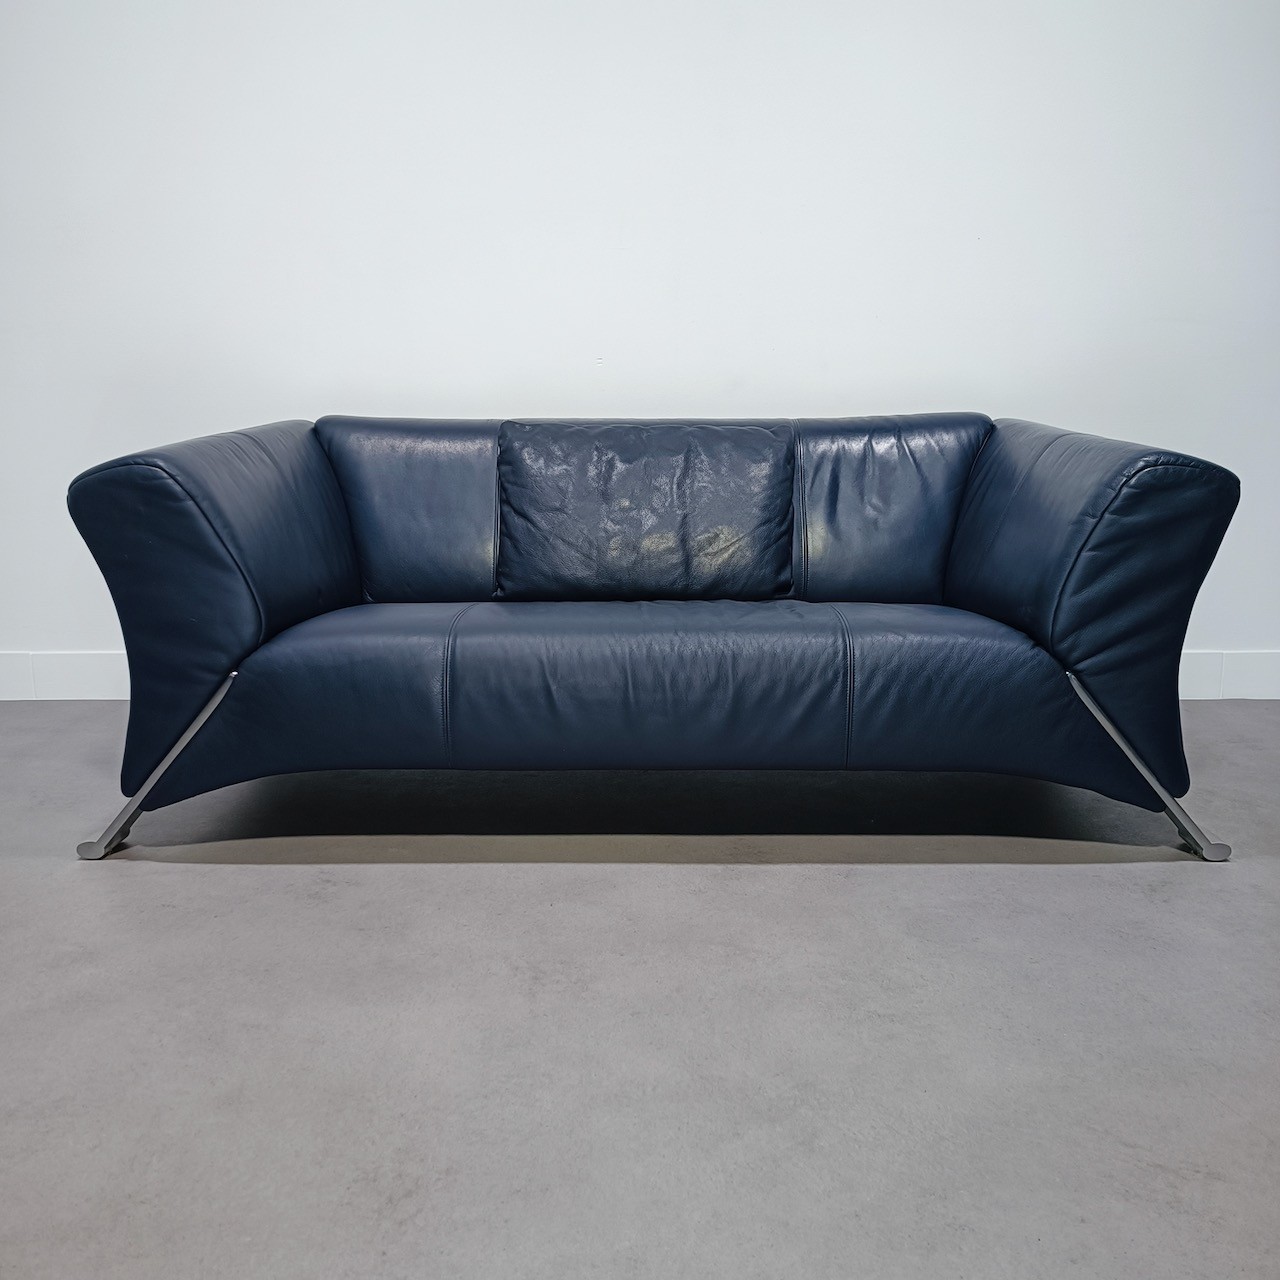 Doe mee moed straal Rolf Benz 322 leather sofa| www.ClaudiaCollections.com